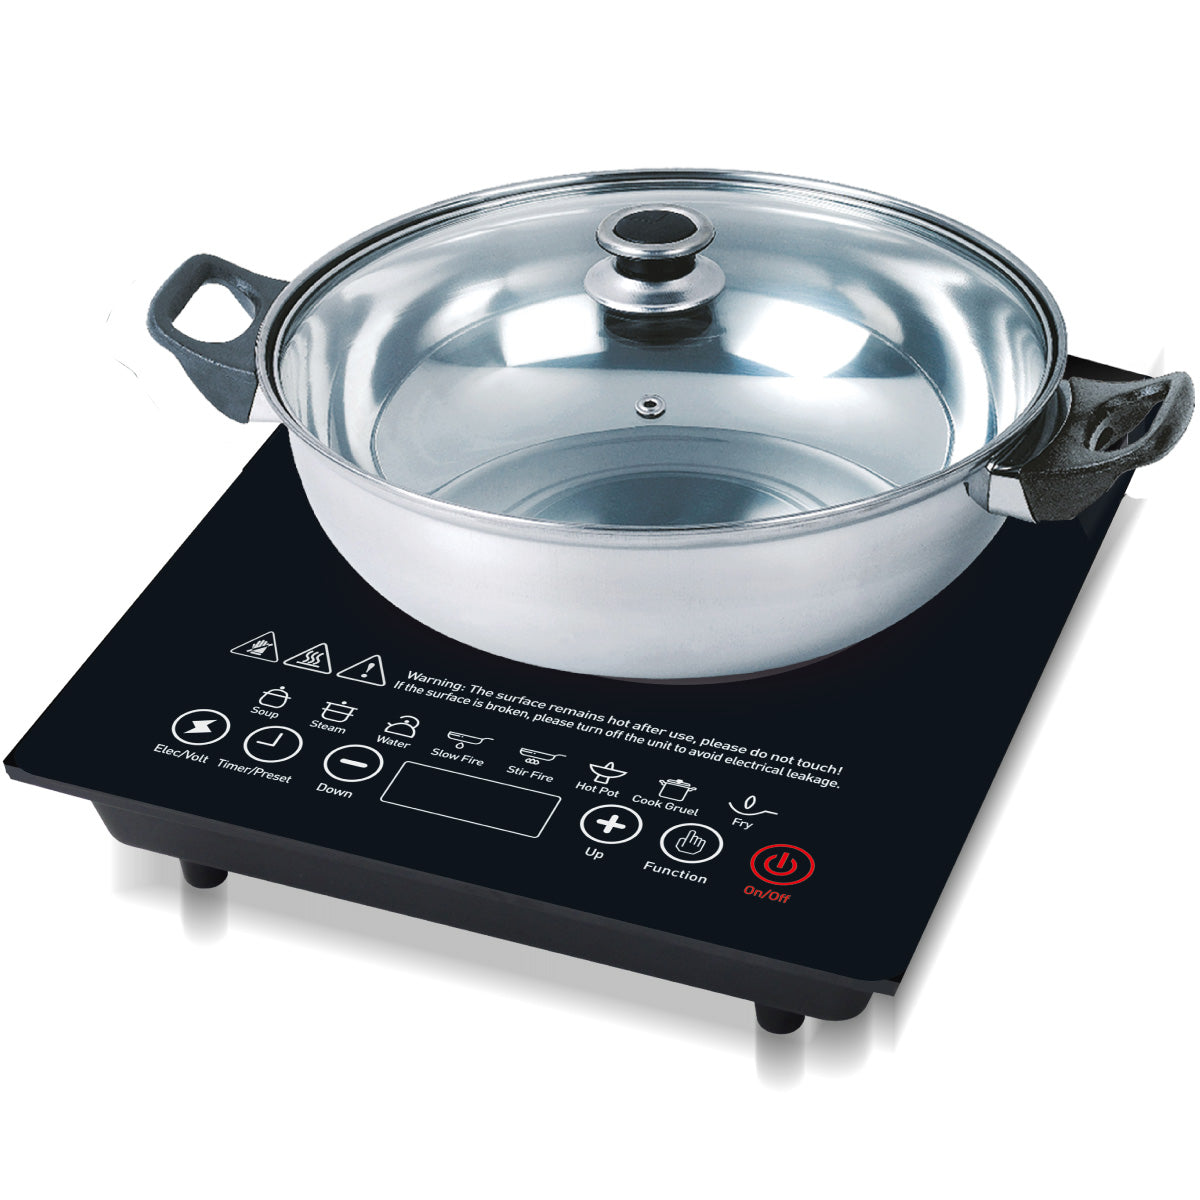 Steamboat Induction Cooker with Stainless Steel Pot (PPIC888+YY Pot)